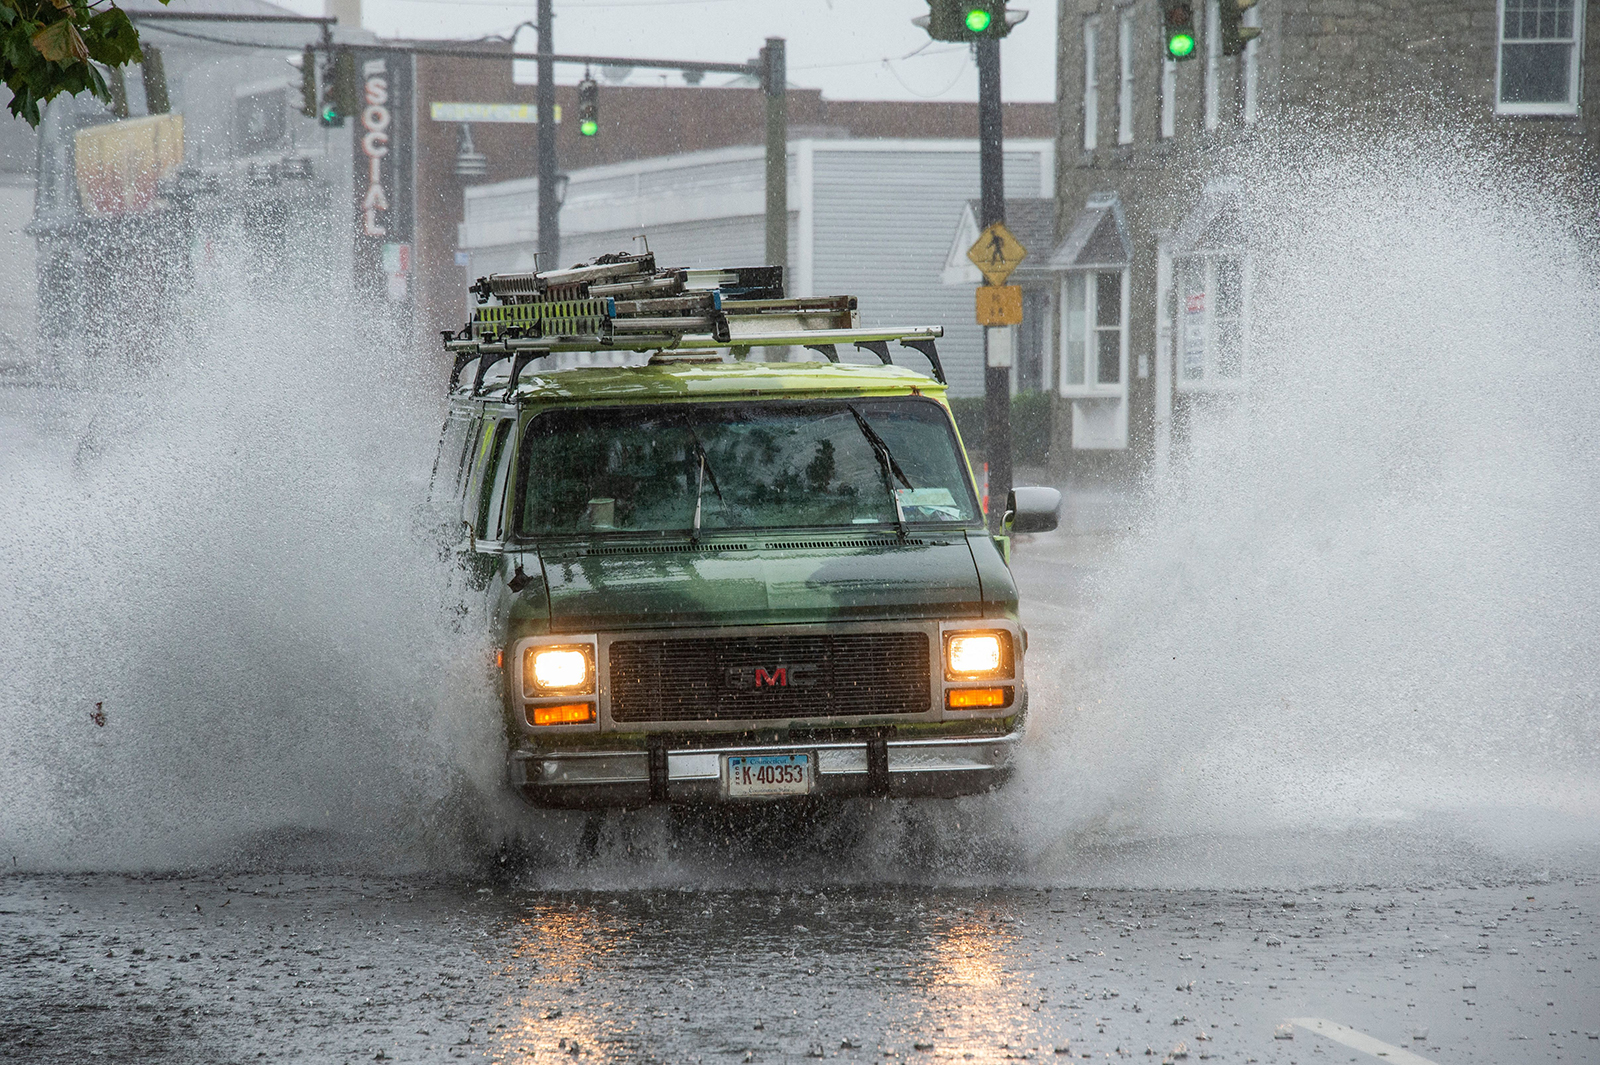 A van drives through a partially flooded street during Tropical Storm Henri in New London, Connecticut on August 22.